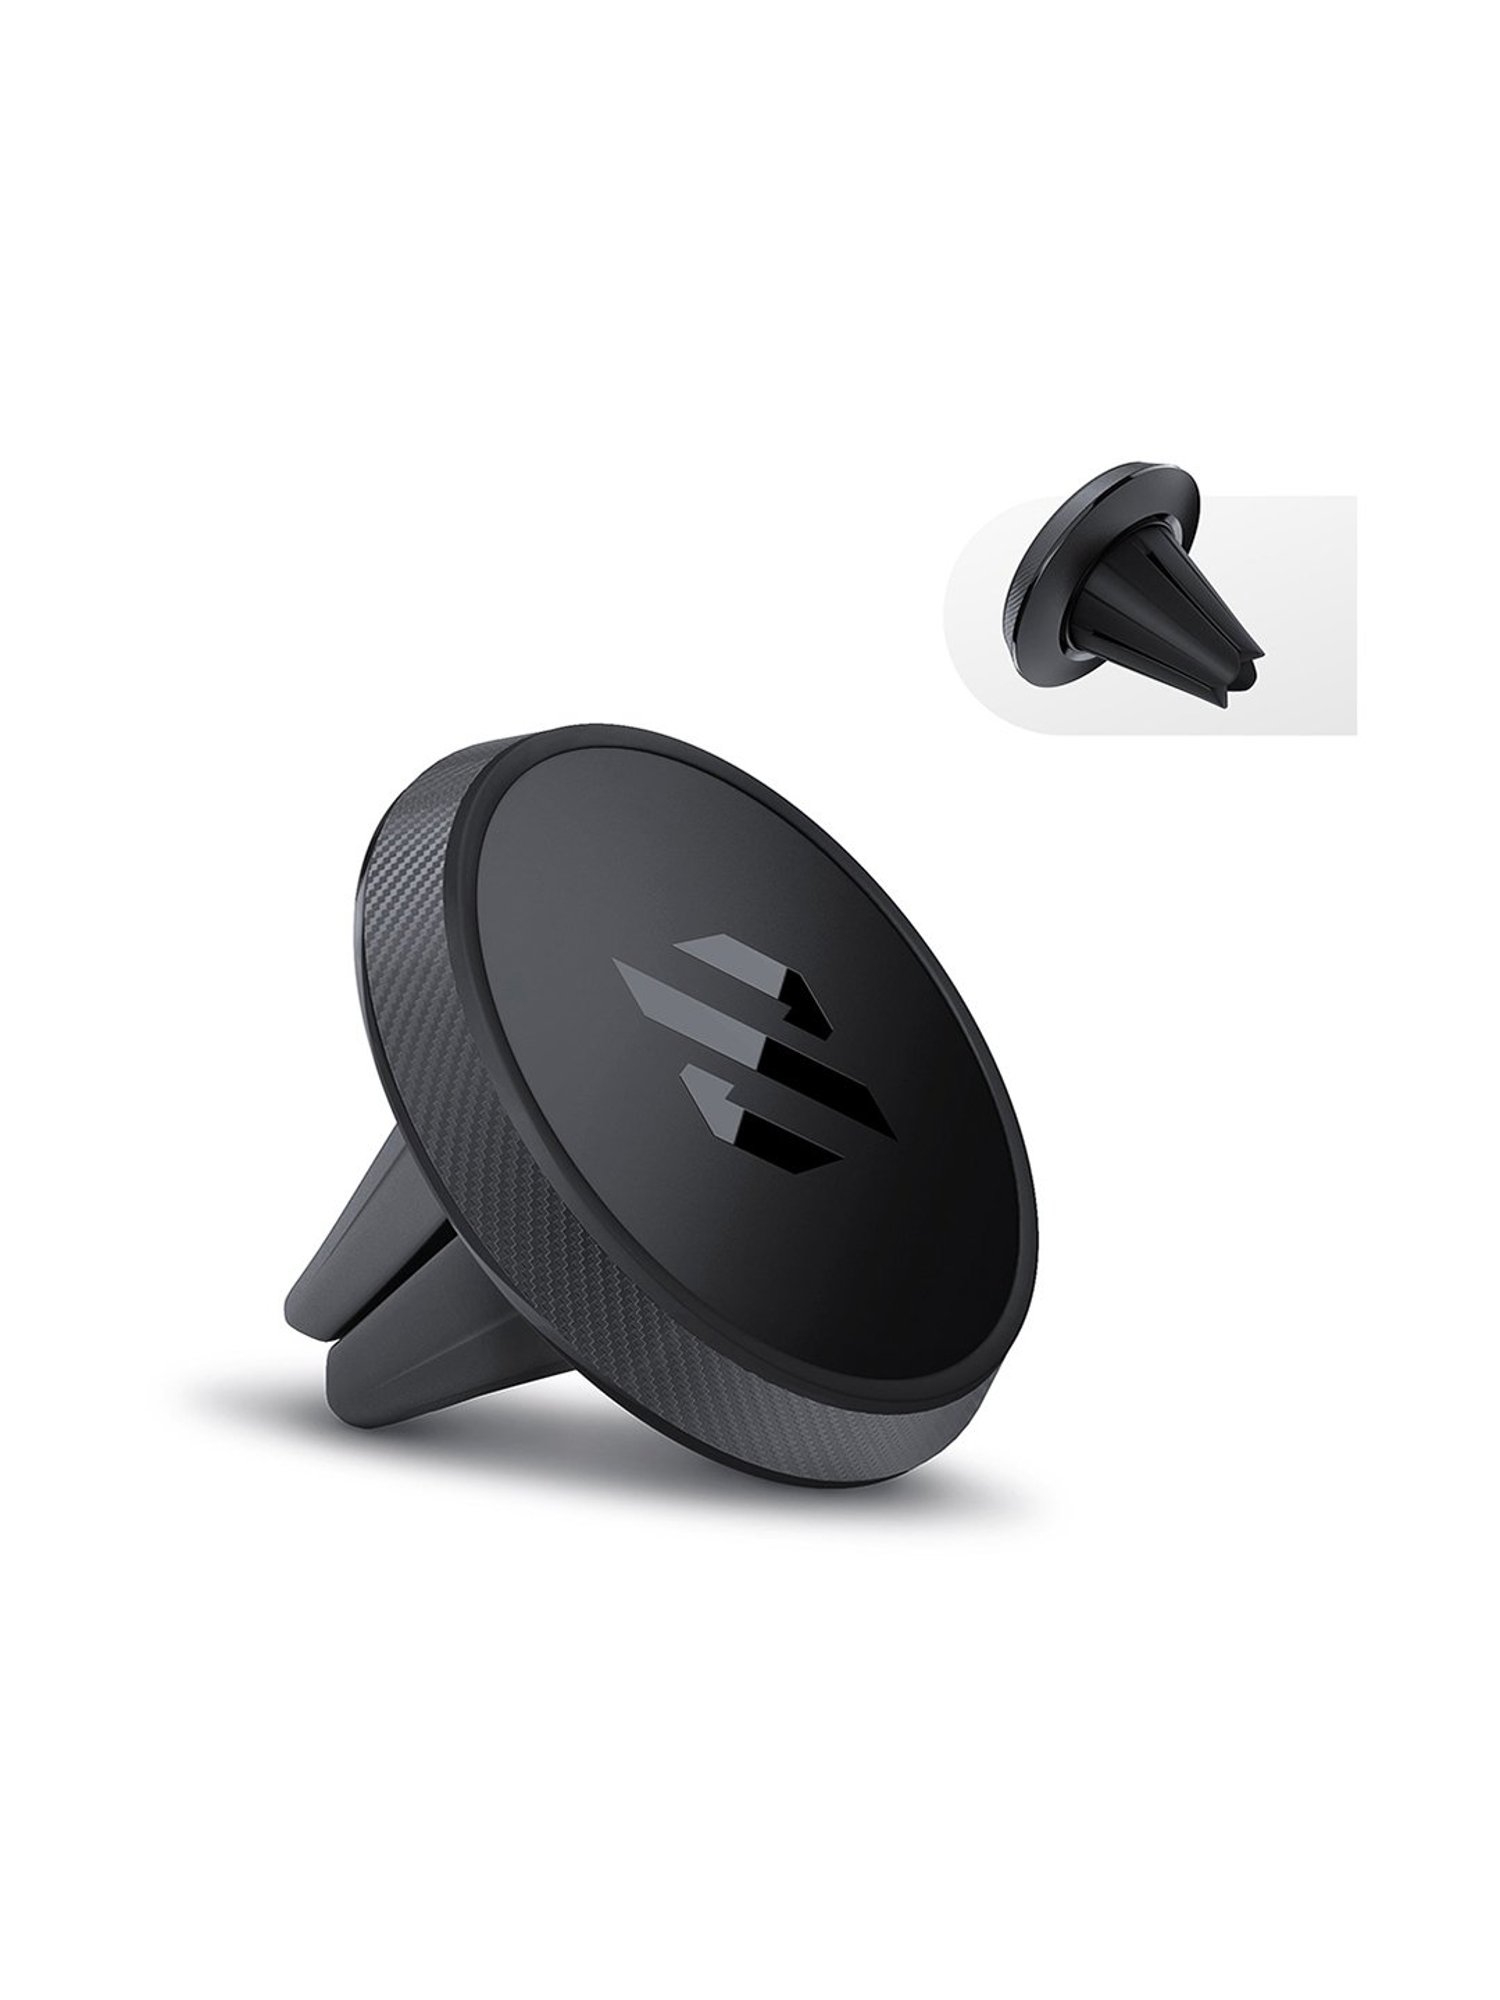 Buy SKYVIK TRUHOLD Airvent Magnetic Mobile Holder at Best Price